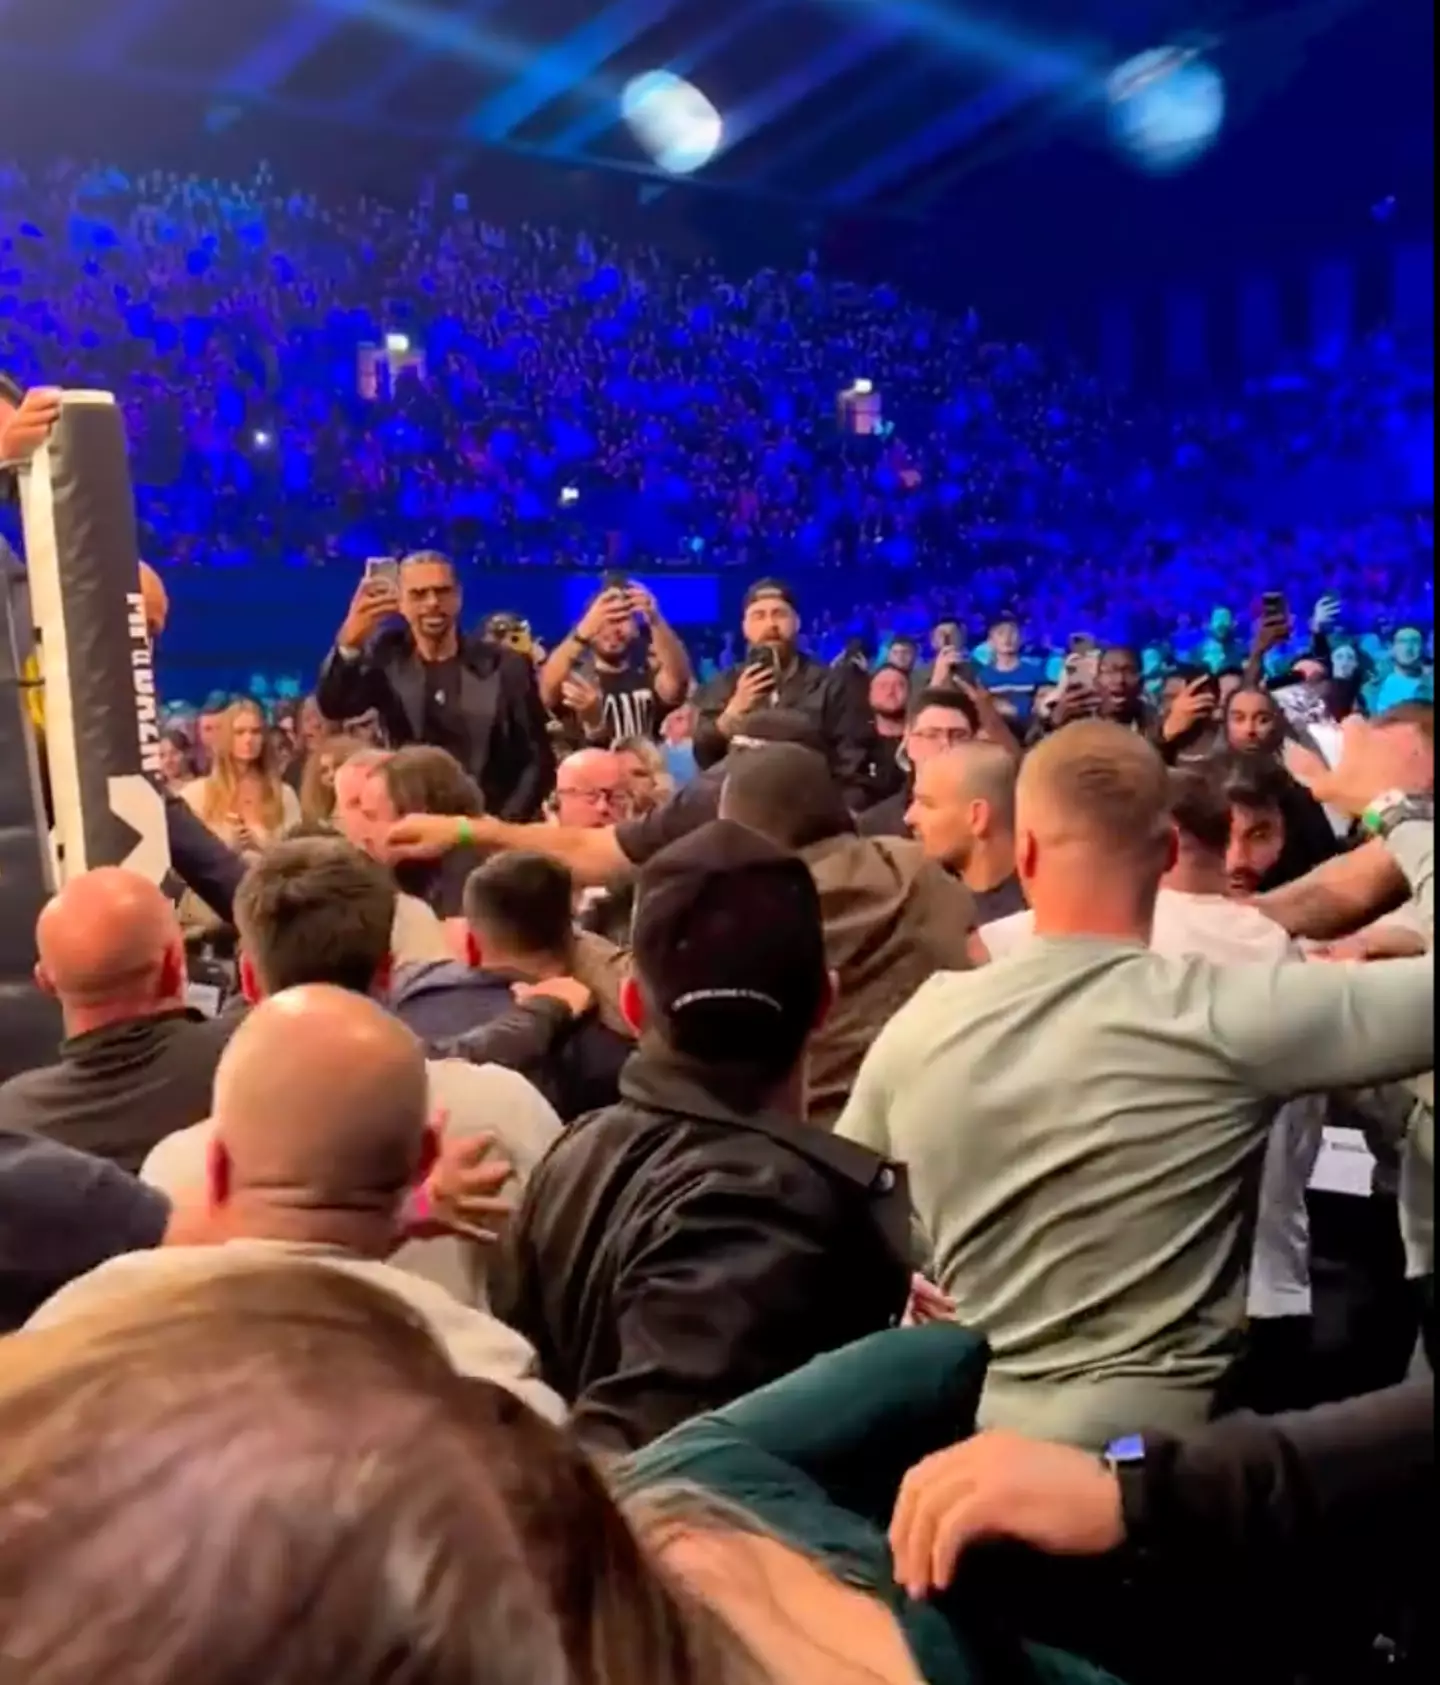 Tommy Fury and Idris Virgo got in a scrap.